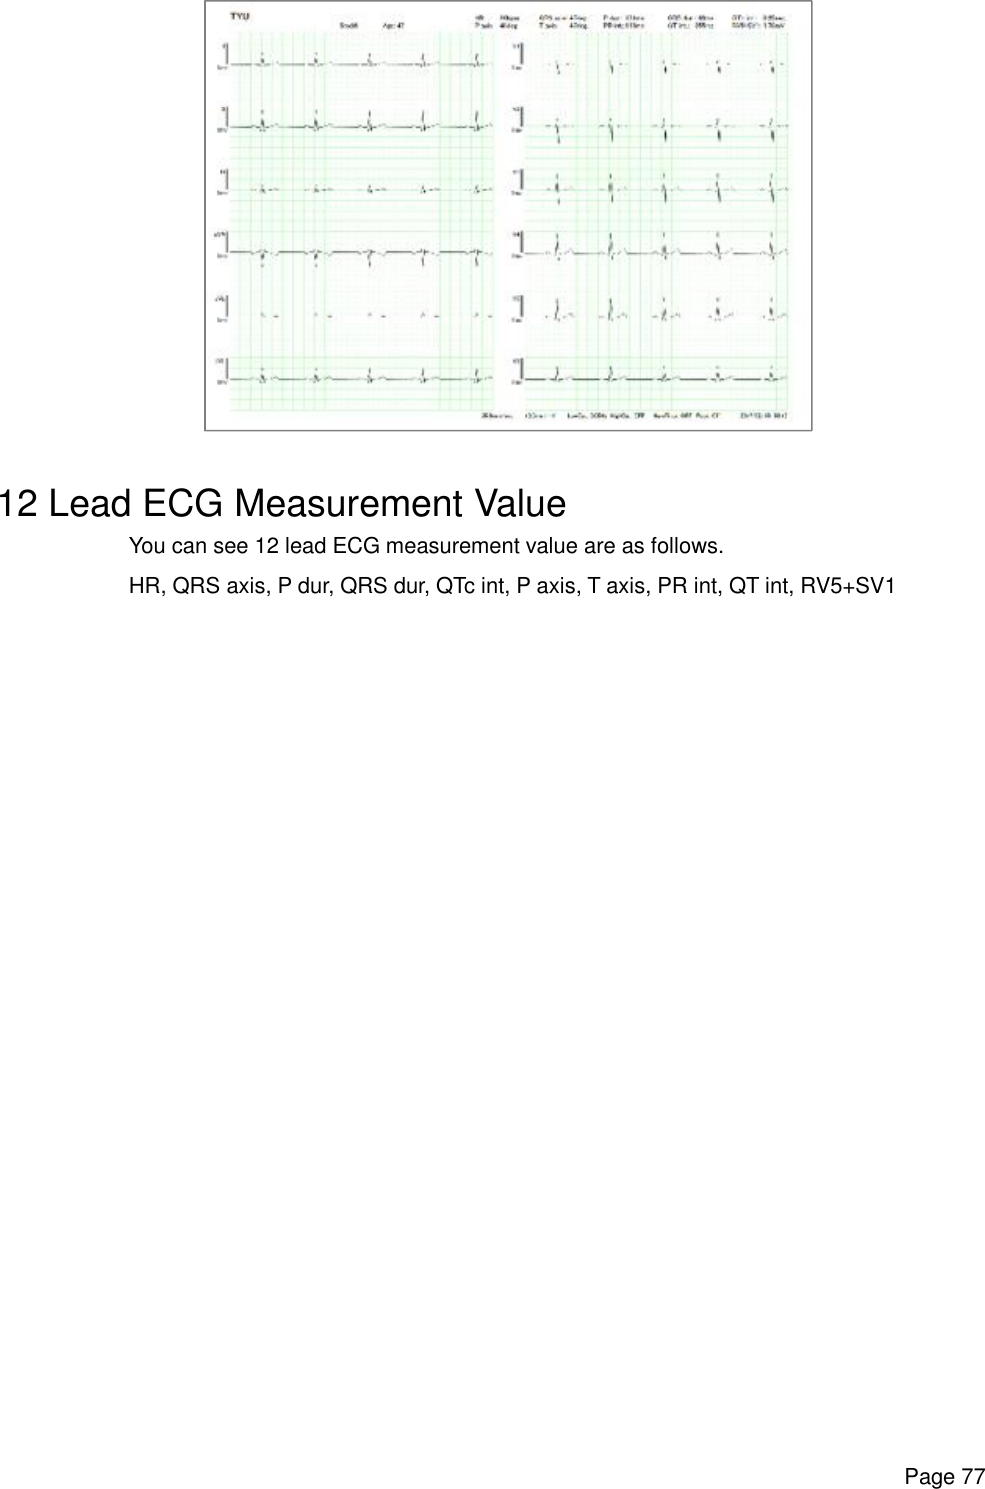      Page 77   12 Lead ECG Measurement Value You can see 12 lead ECG measurement value are as follows. HR, QRS axis, P dur, QRS dur, QTc int, P axis, T axis, PR int, QT int, RV5+SV1  